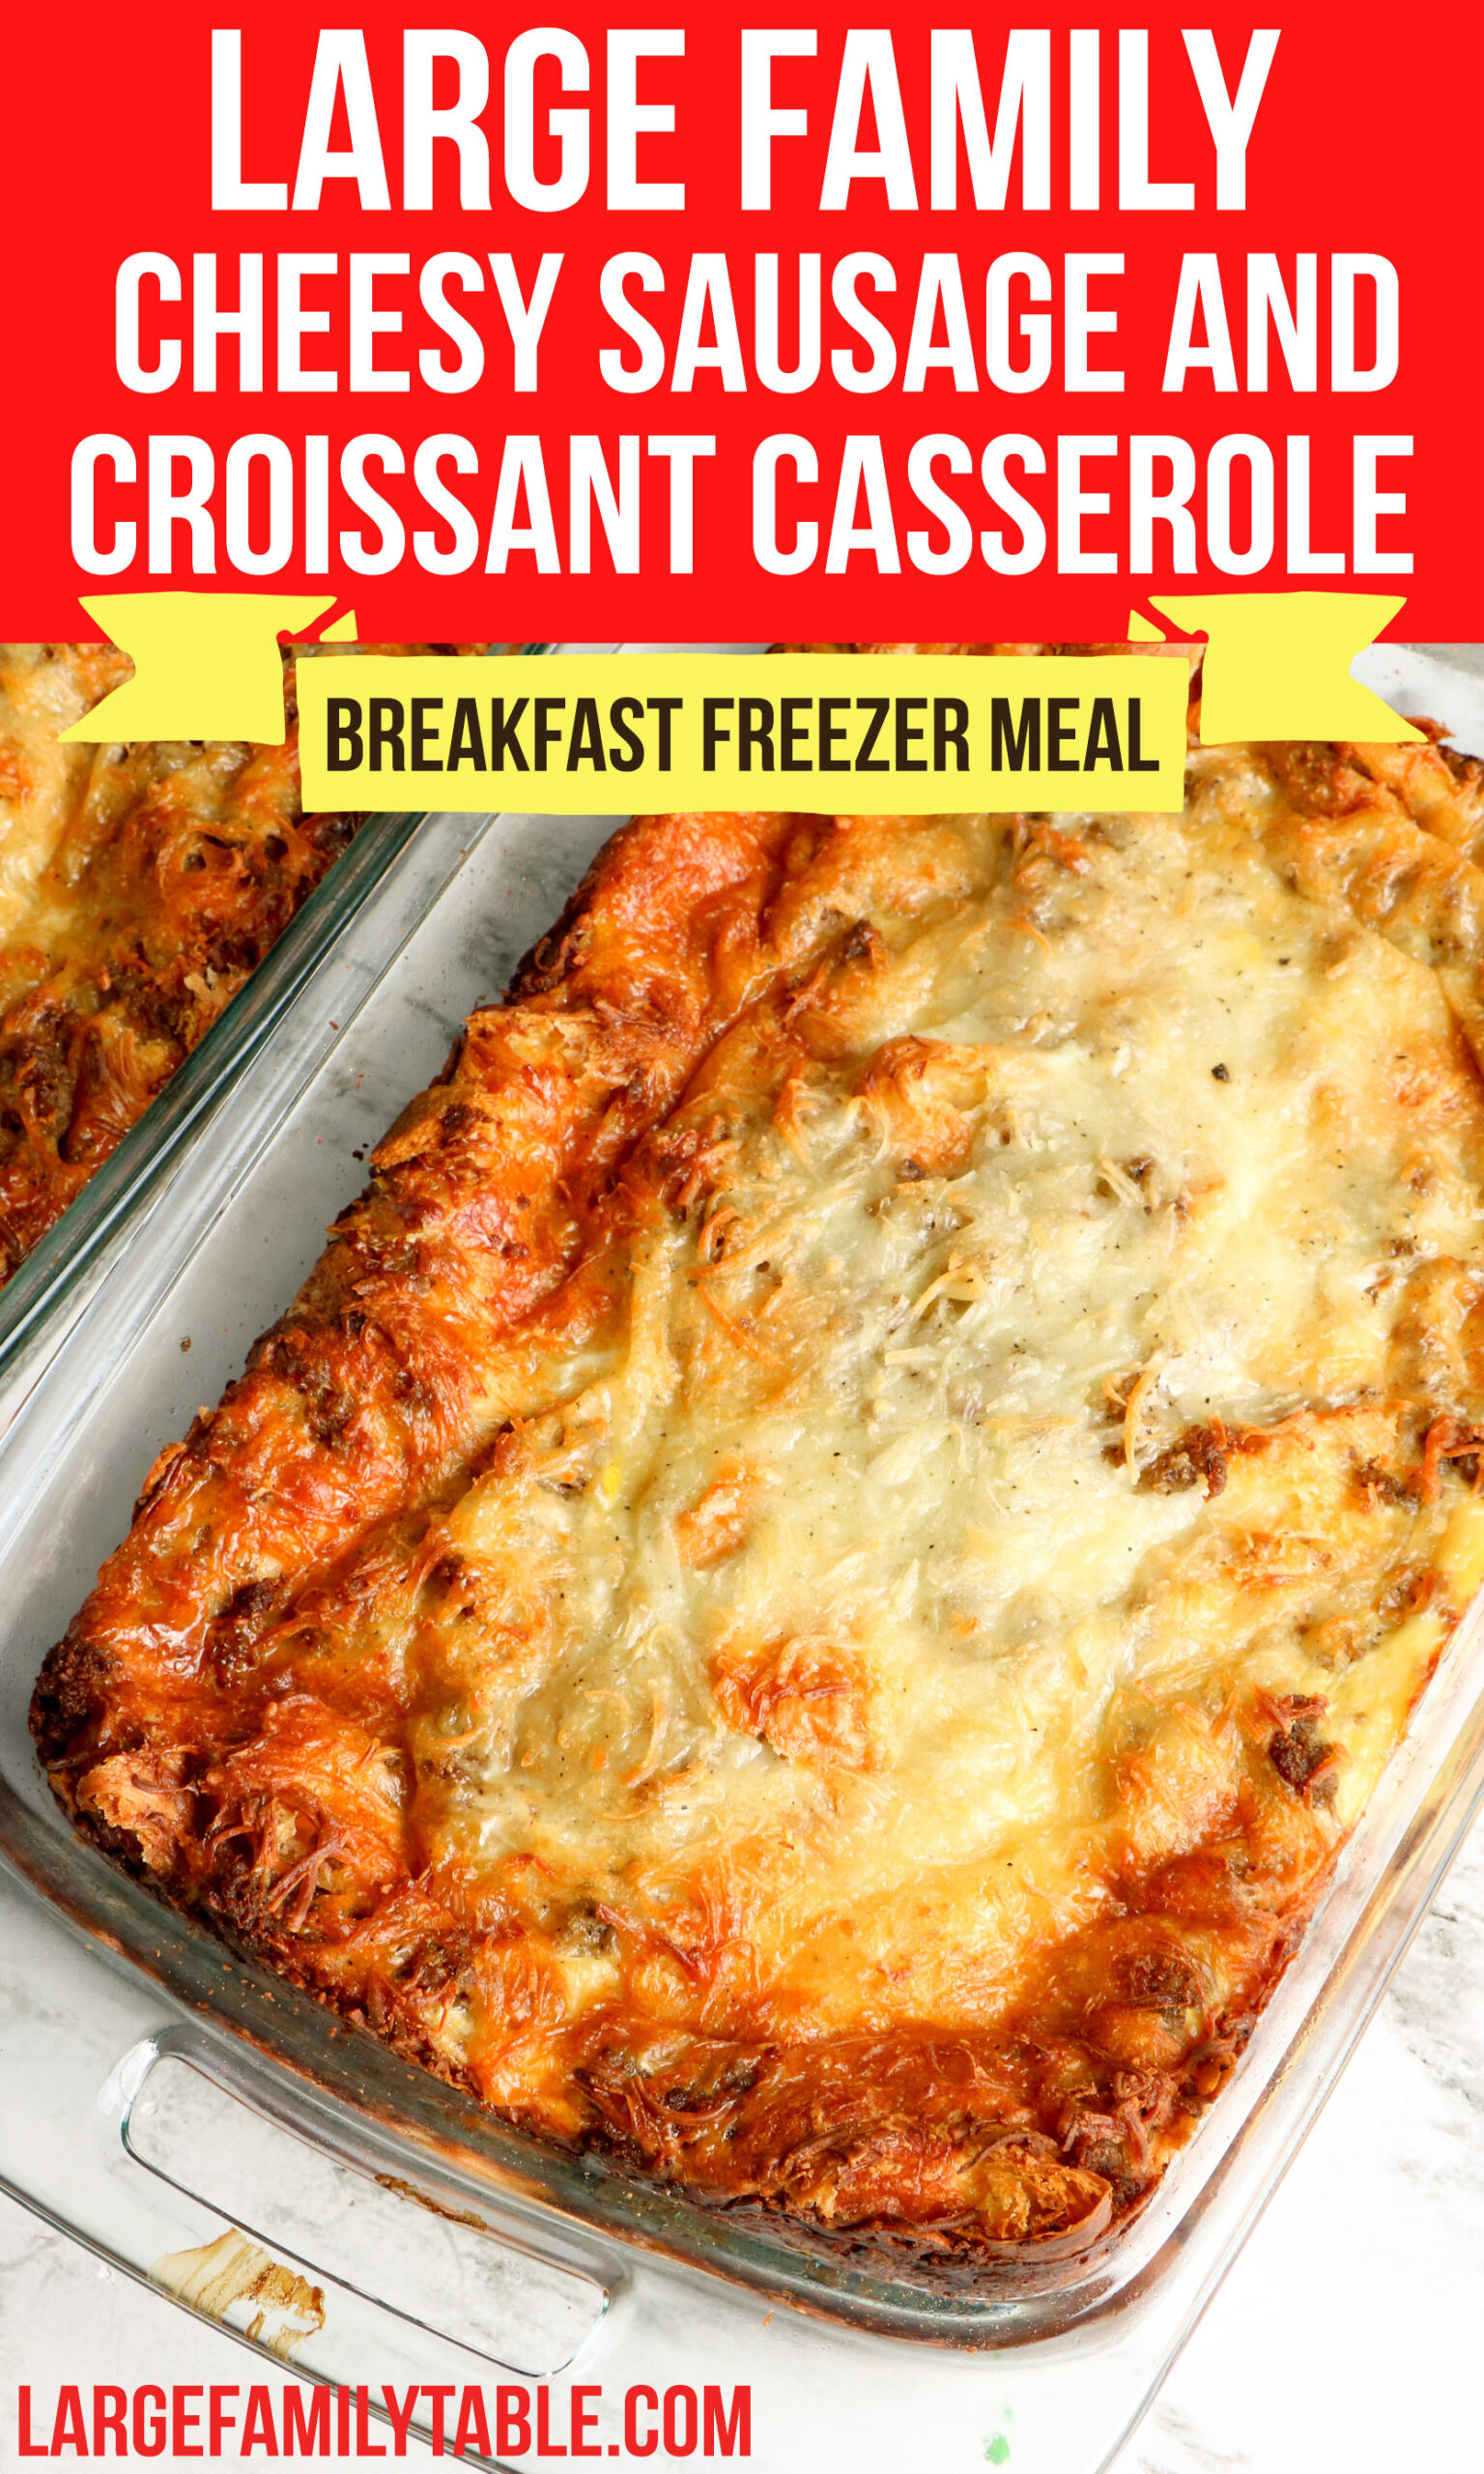 Large Family Cheesy Sausage Croissant Casserole